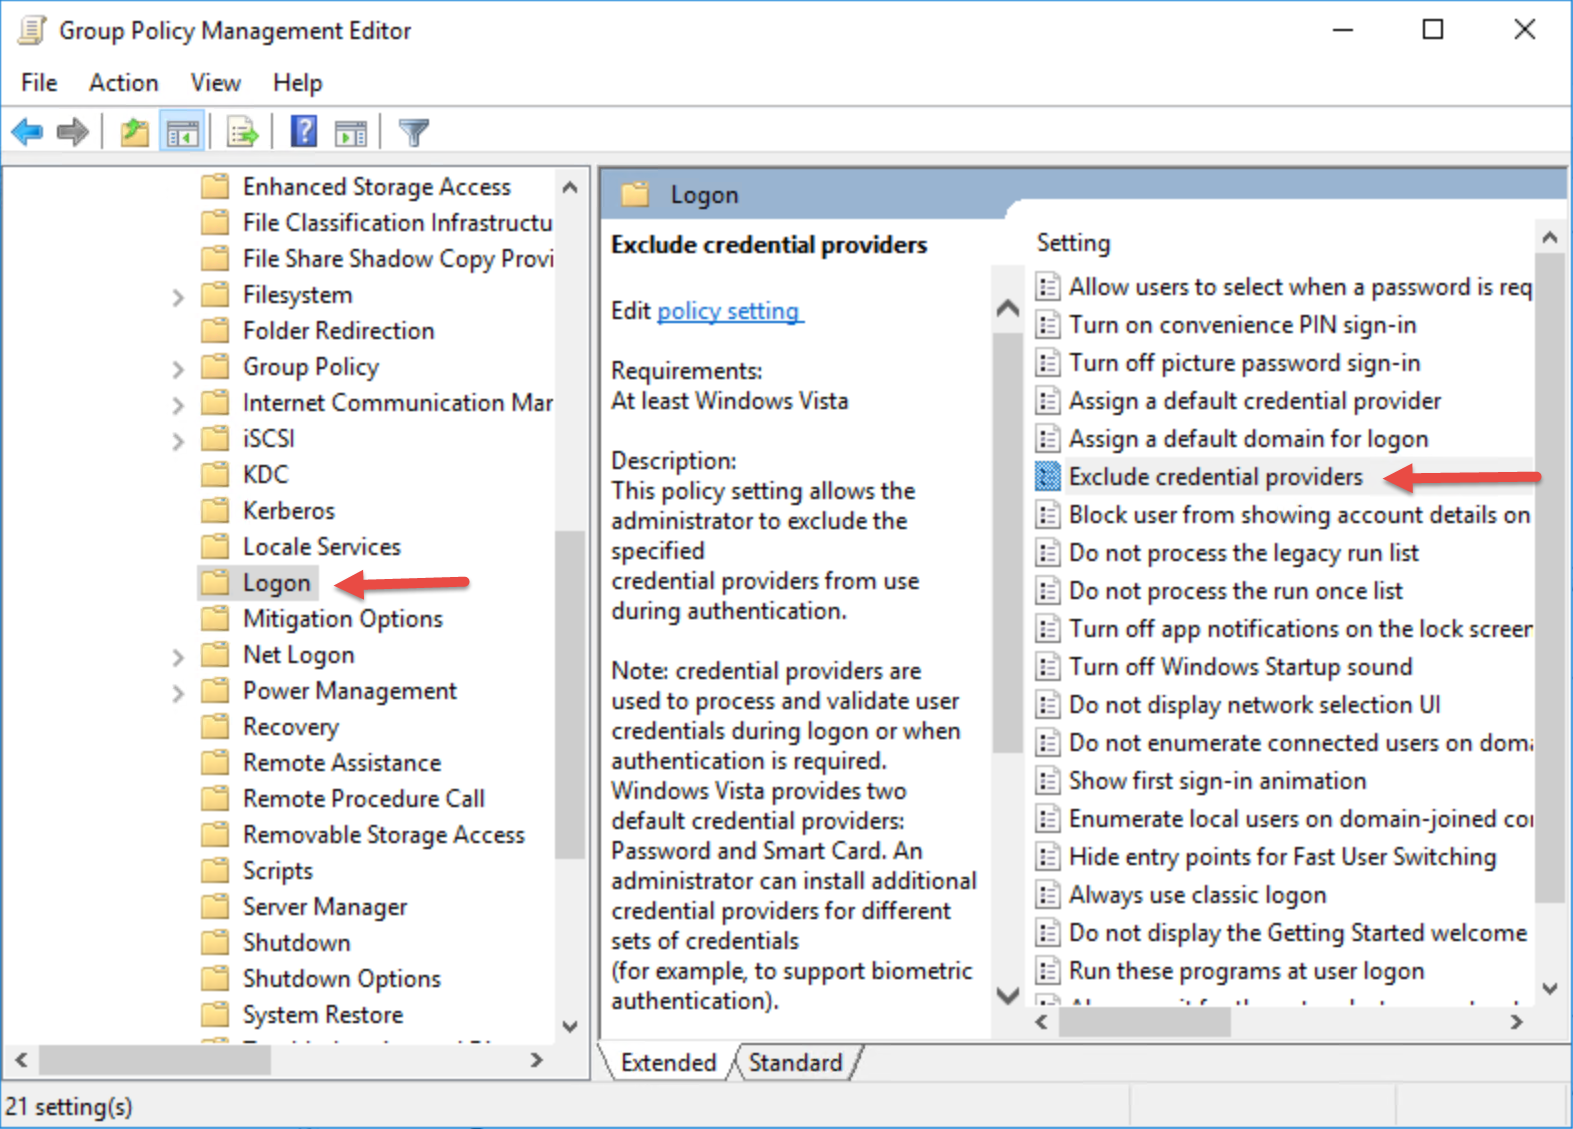 The Group Policy Management Editor displaying the location of 'Logon' node and the policy setting 'Exclude credential providers'.